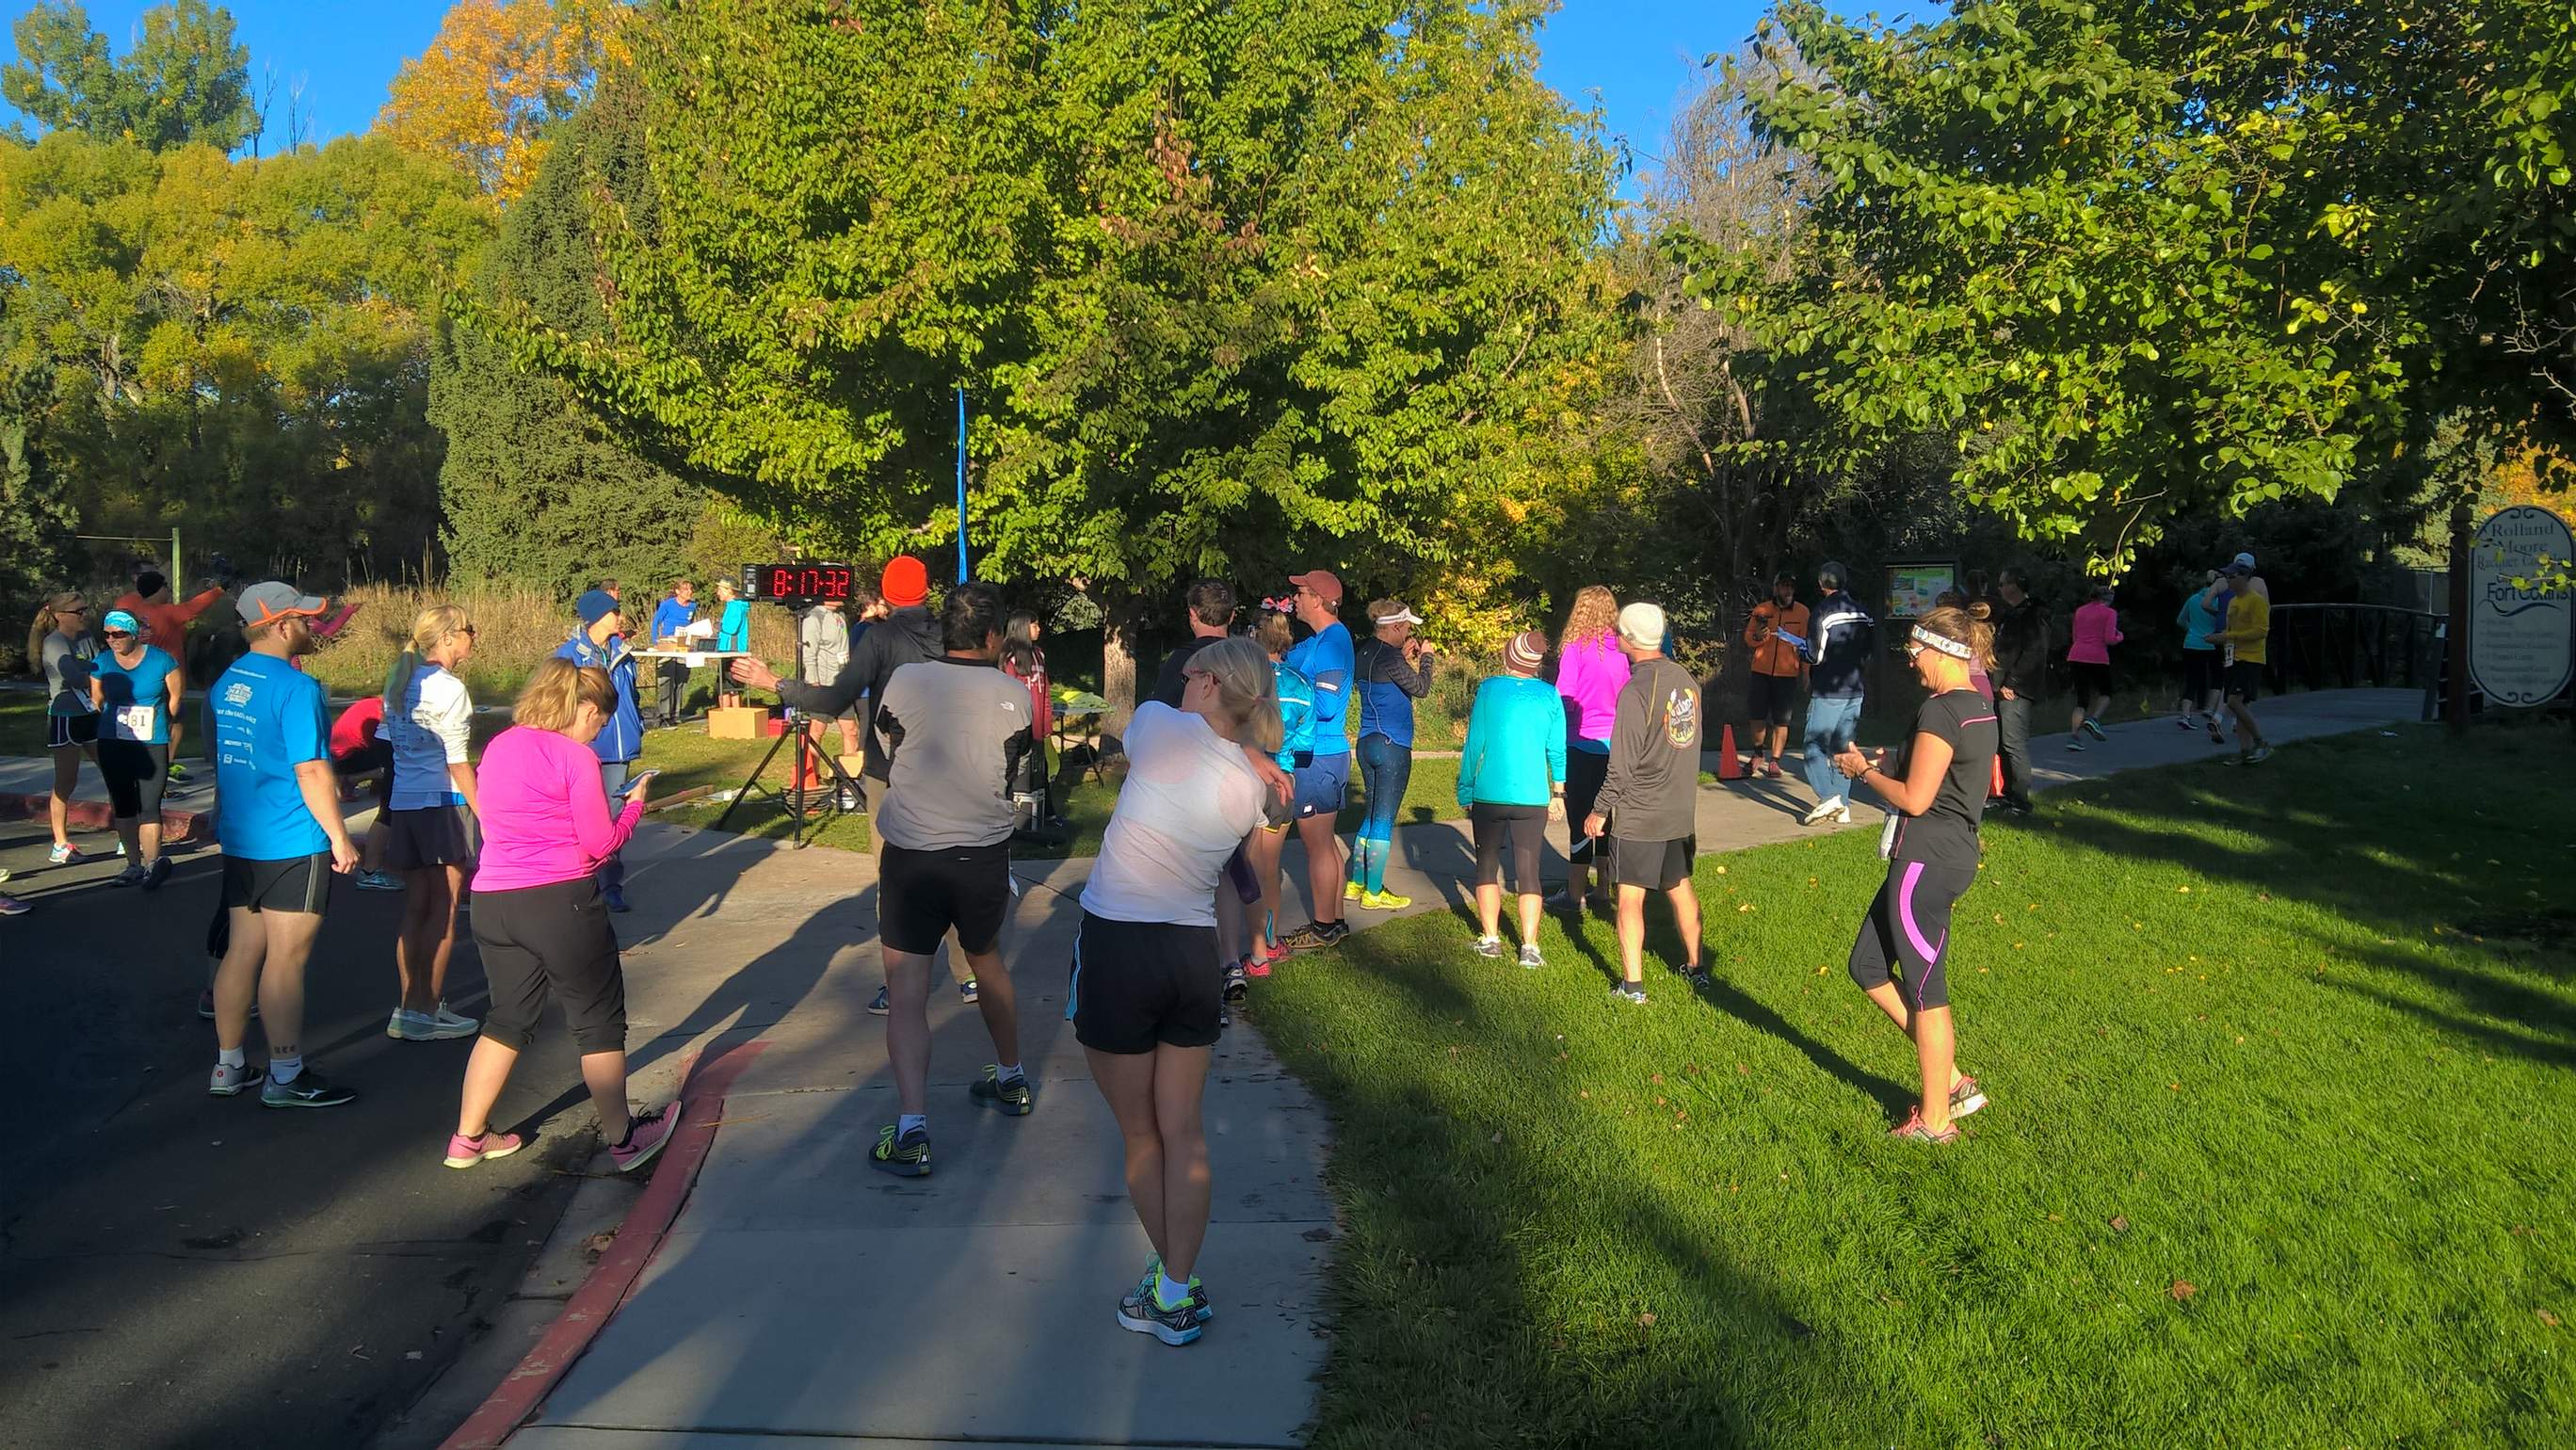 Runners at the start of the 2016 Rolland Moore Park 4k Tortoise & Hare race.